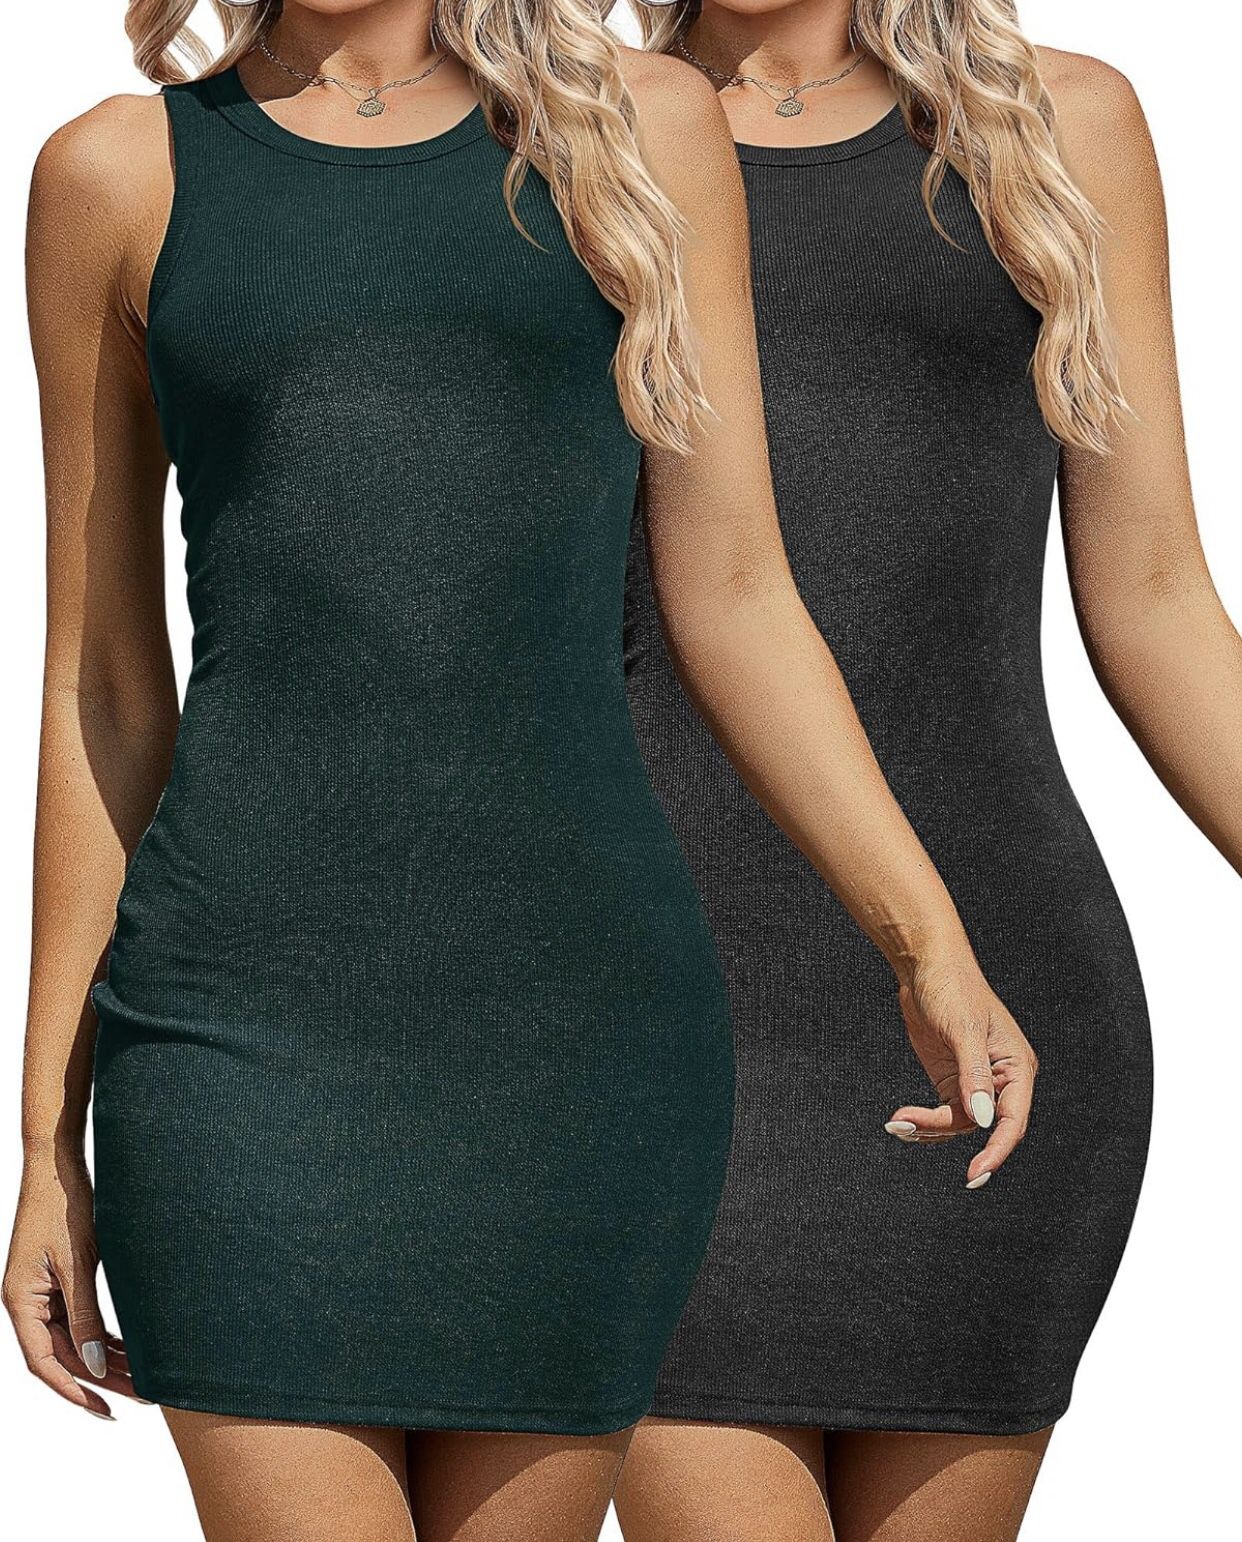 Women's Sleeveless Tank Dress, Ribbed Scoop Neck Ruched Stretchy Bodycon Slim Fit Mini Tank Dress